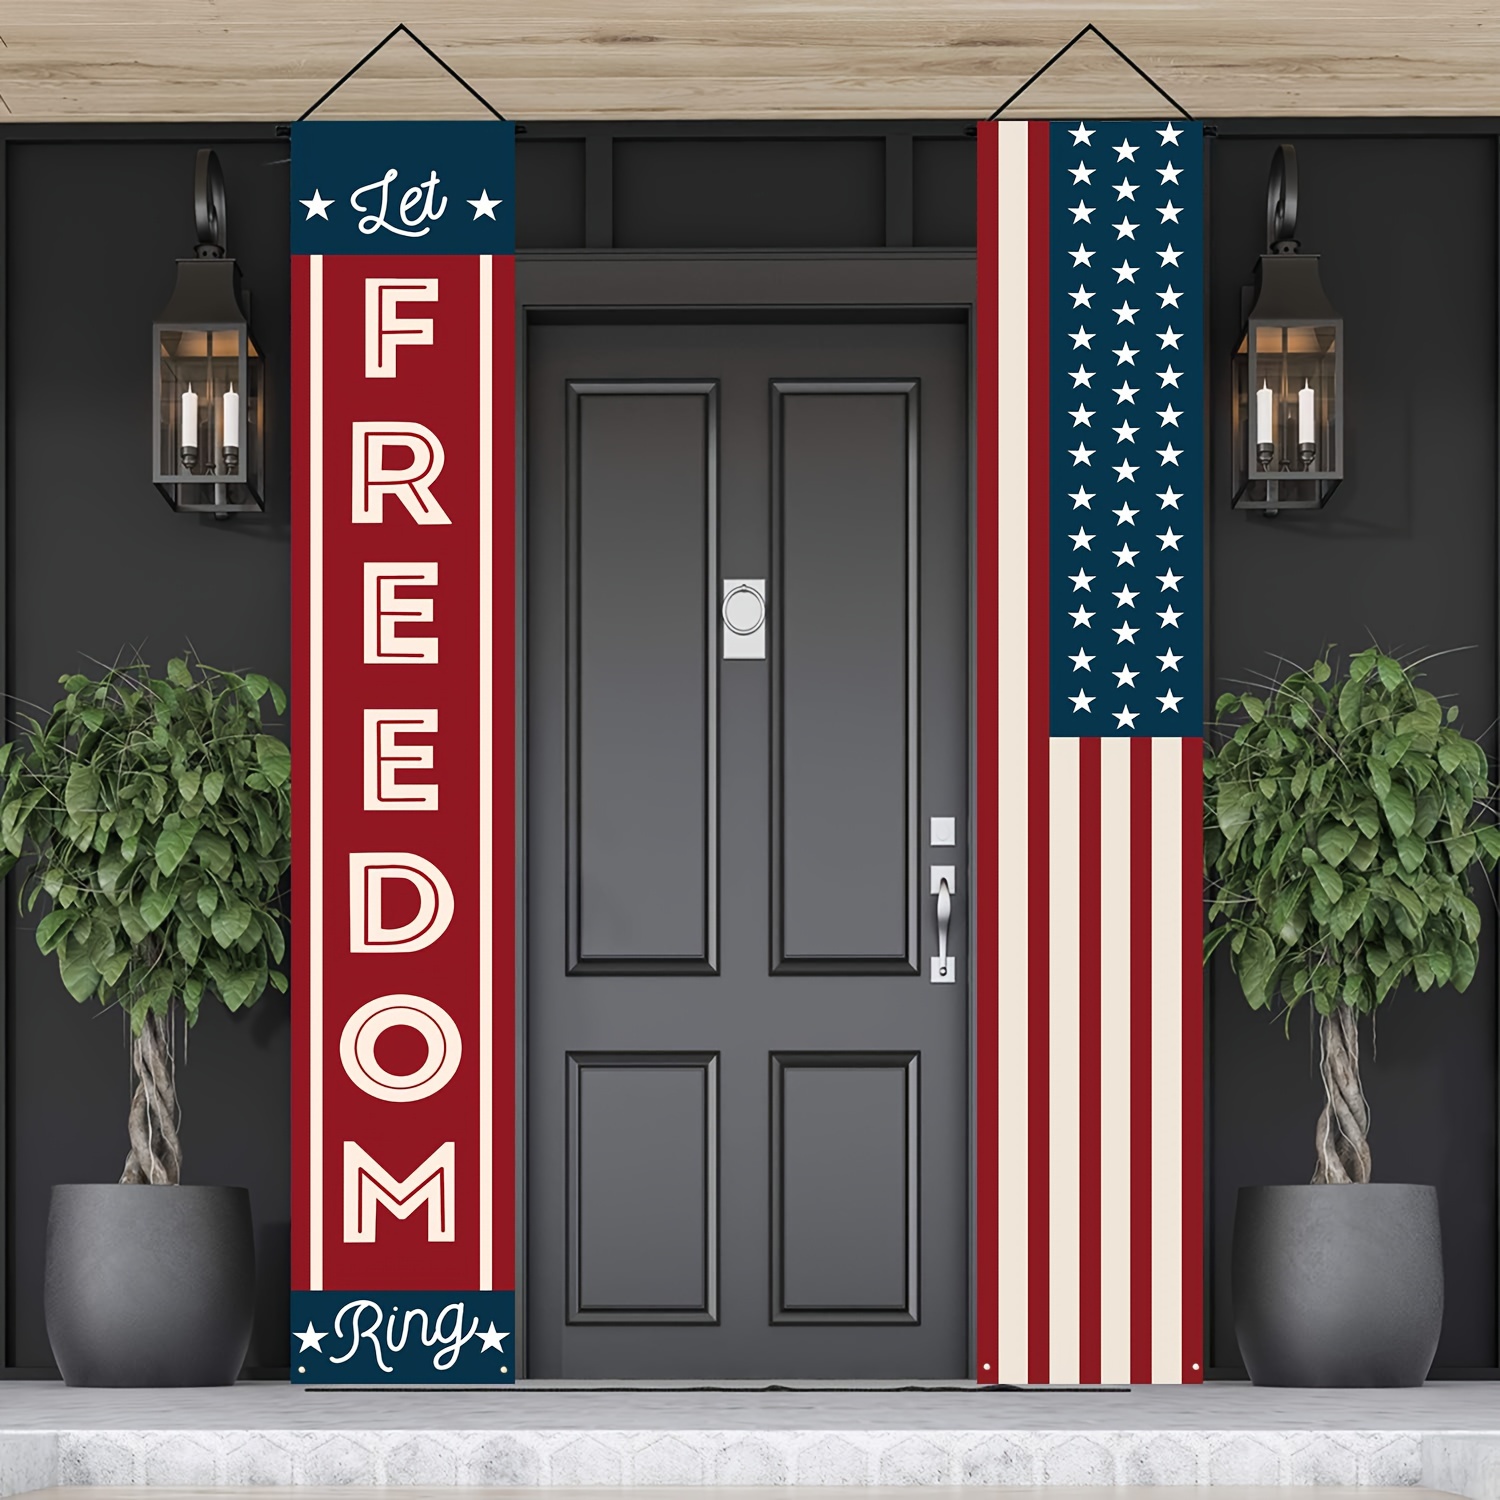 

1 Pair, Freedom Porch Banner Decor, Porch Hanging Decor, Home Decor, Room Decor, Door Decor, Wall Decor, Party Background Decor, Party Decor/supplies/gifts